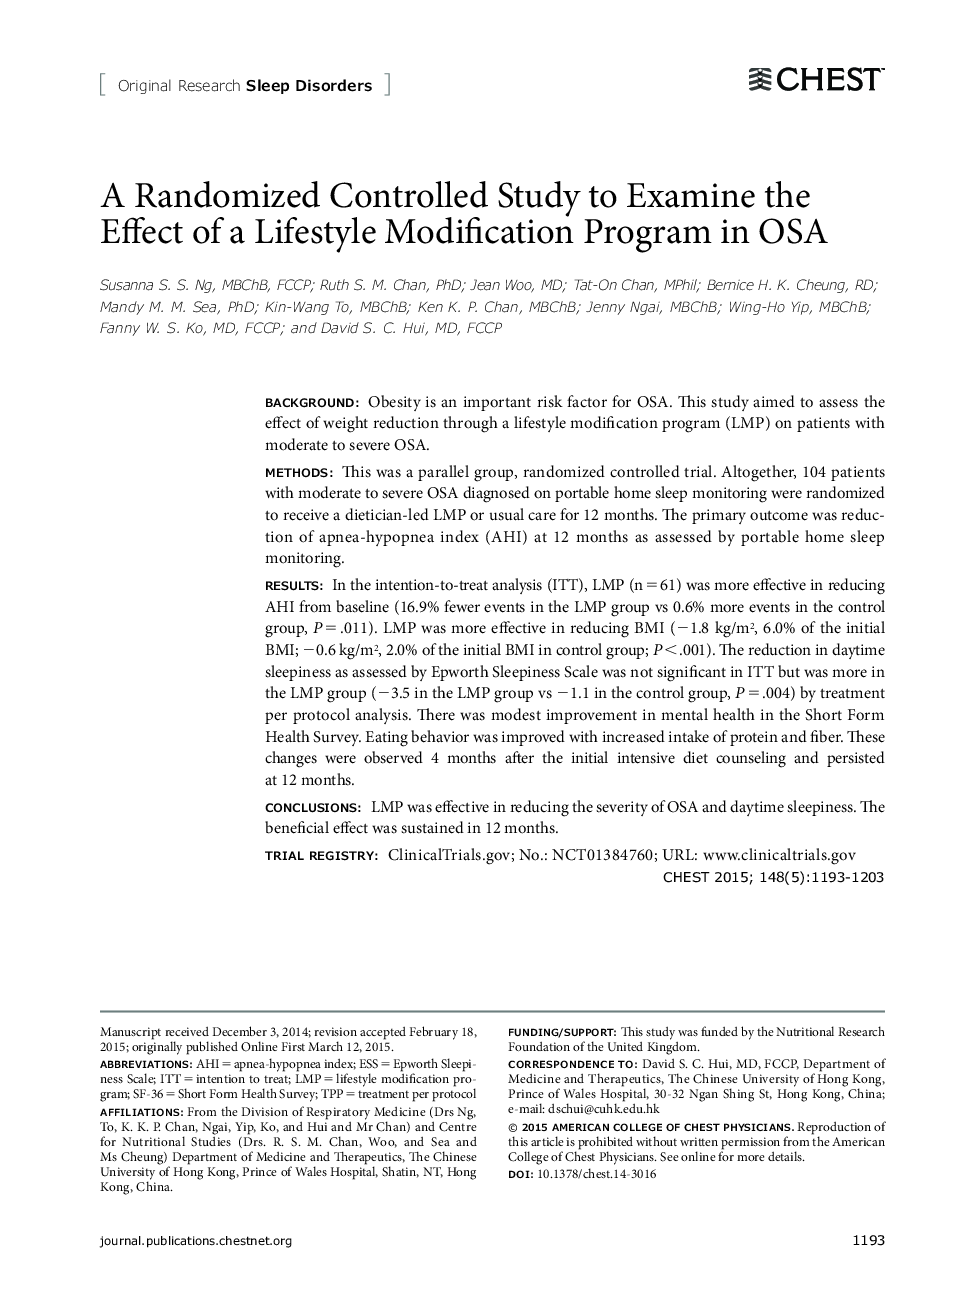 A Randomized Controlled Study to Examine the Effect of a Lifestyle Modification Program in OSA